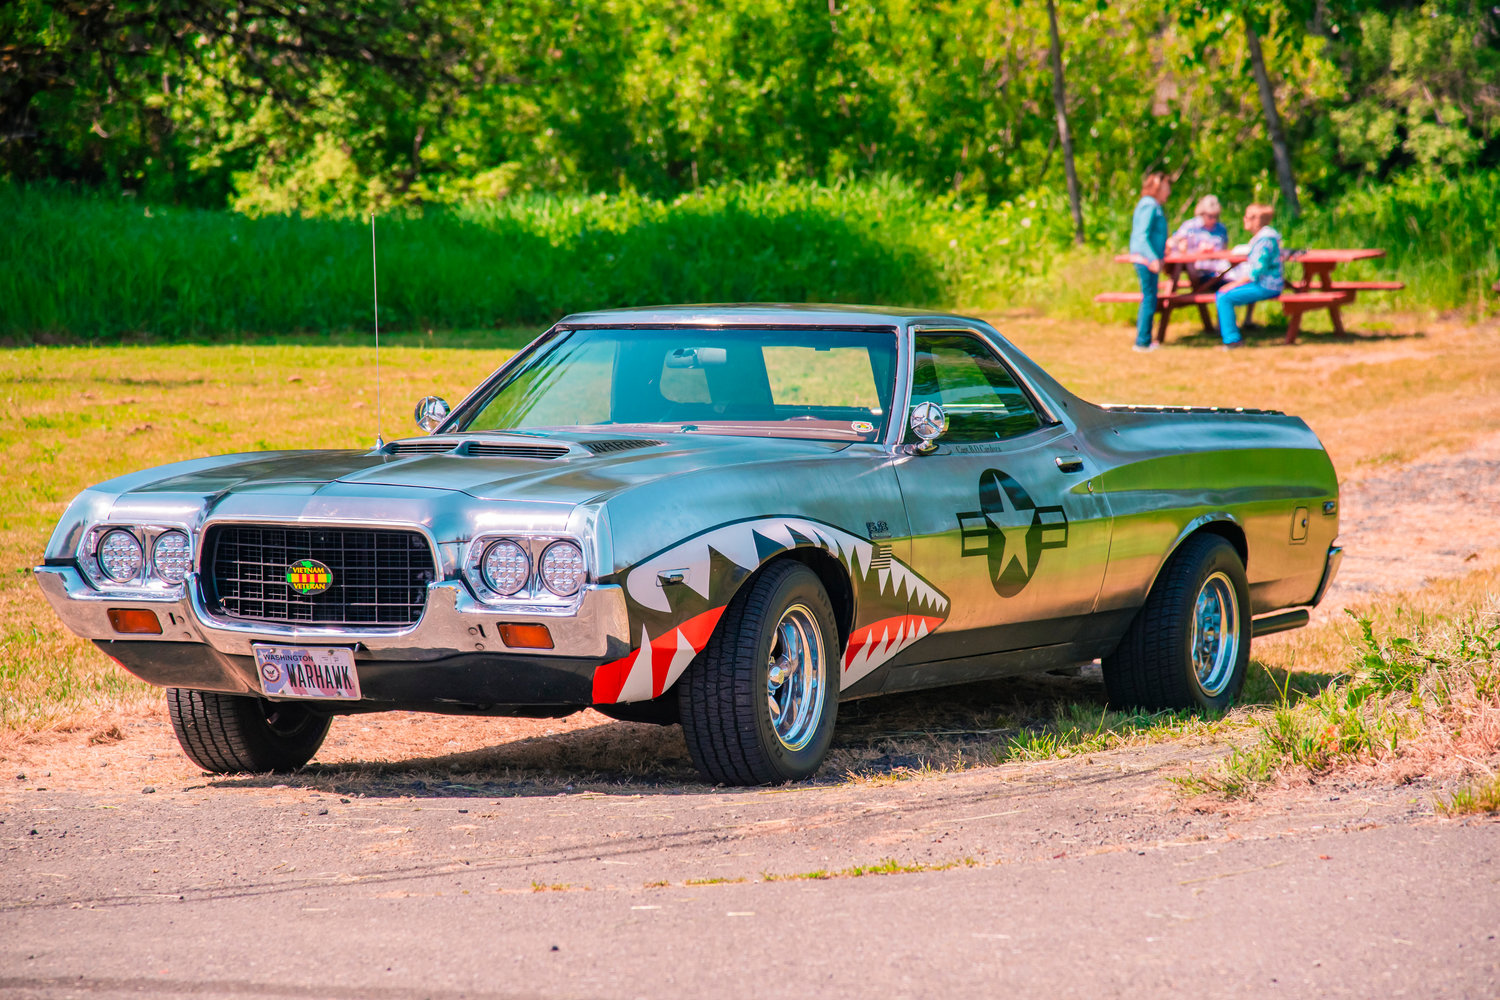 A vehicle with the license plate “Warhawk” sits on display during a “Back The Blue” event in Adna on Saturday.